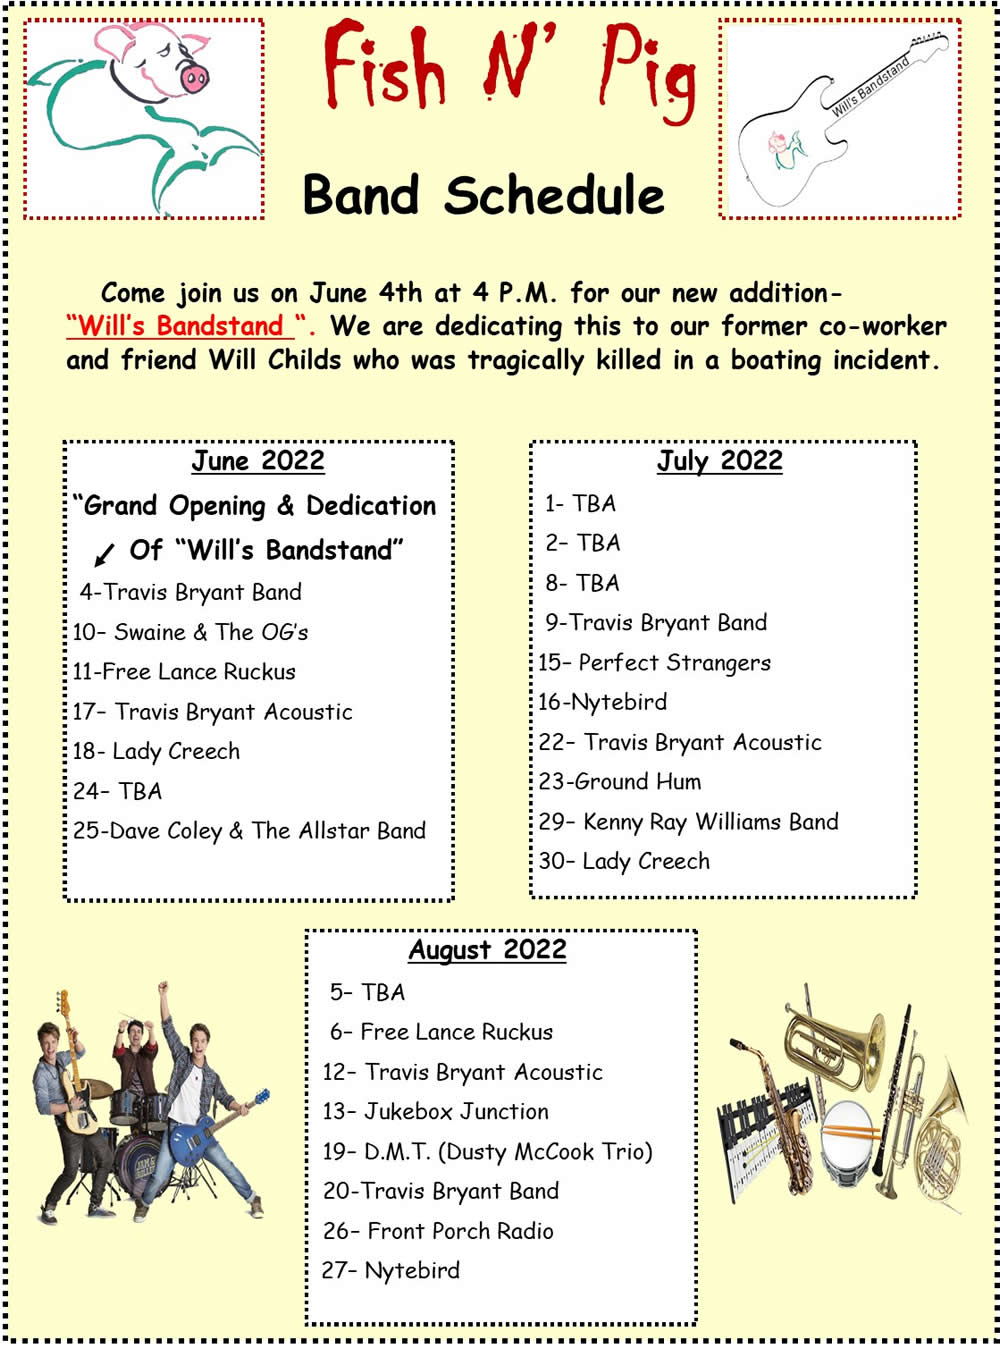 2022 Band Schedule